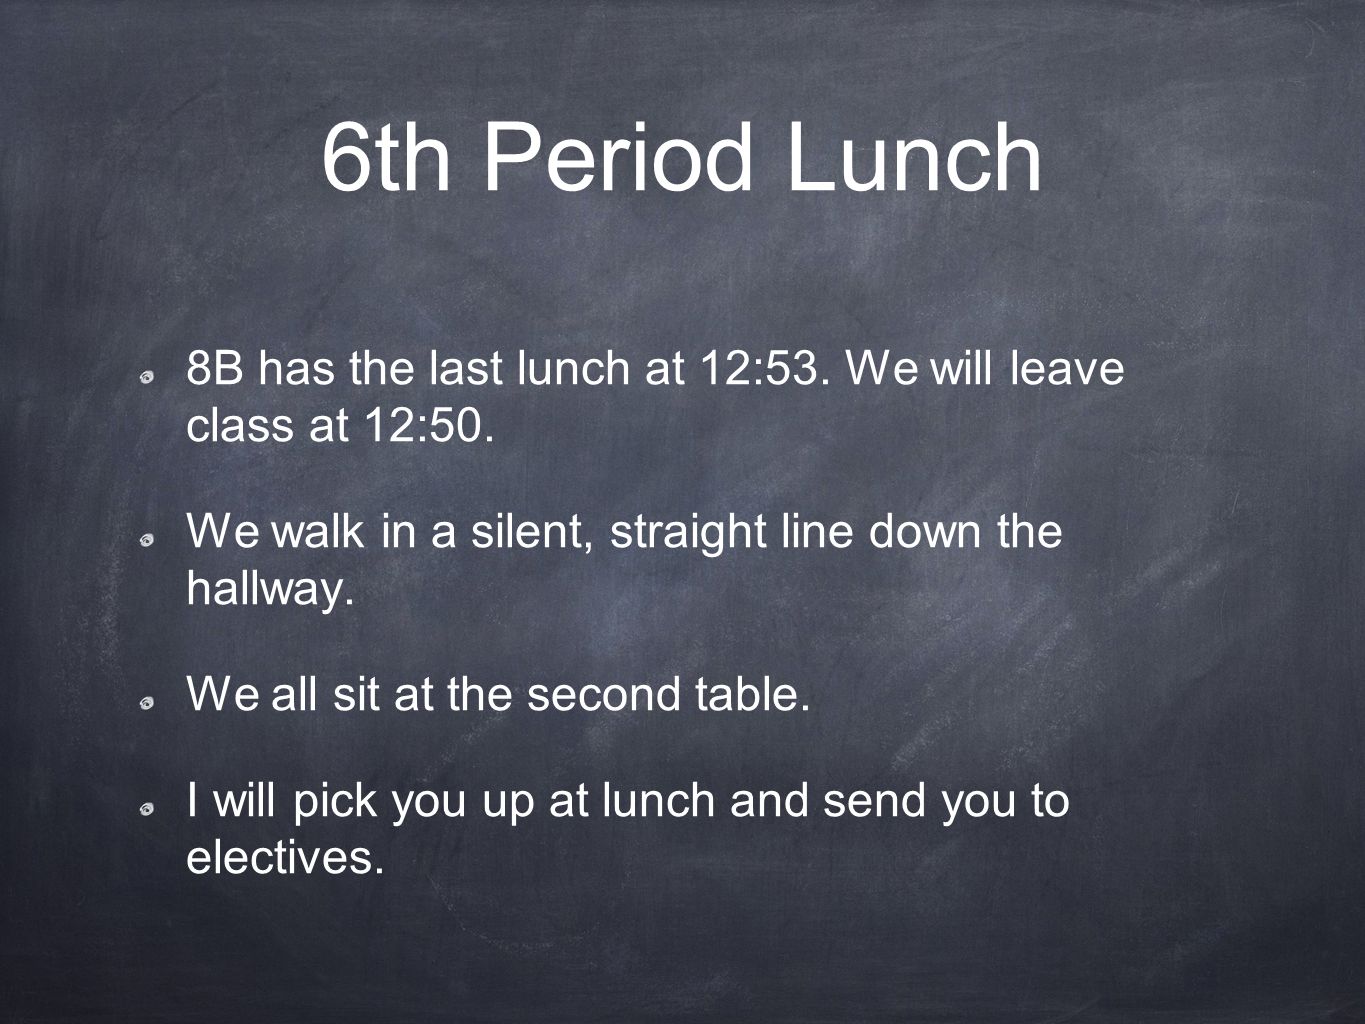 6th Period Lunch 8B has the last lunch at 12:53. We will leave class at 12:50.